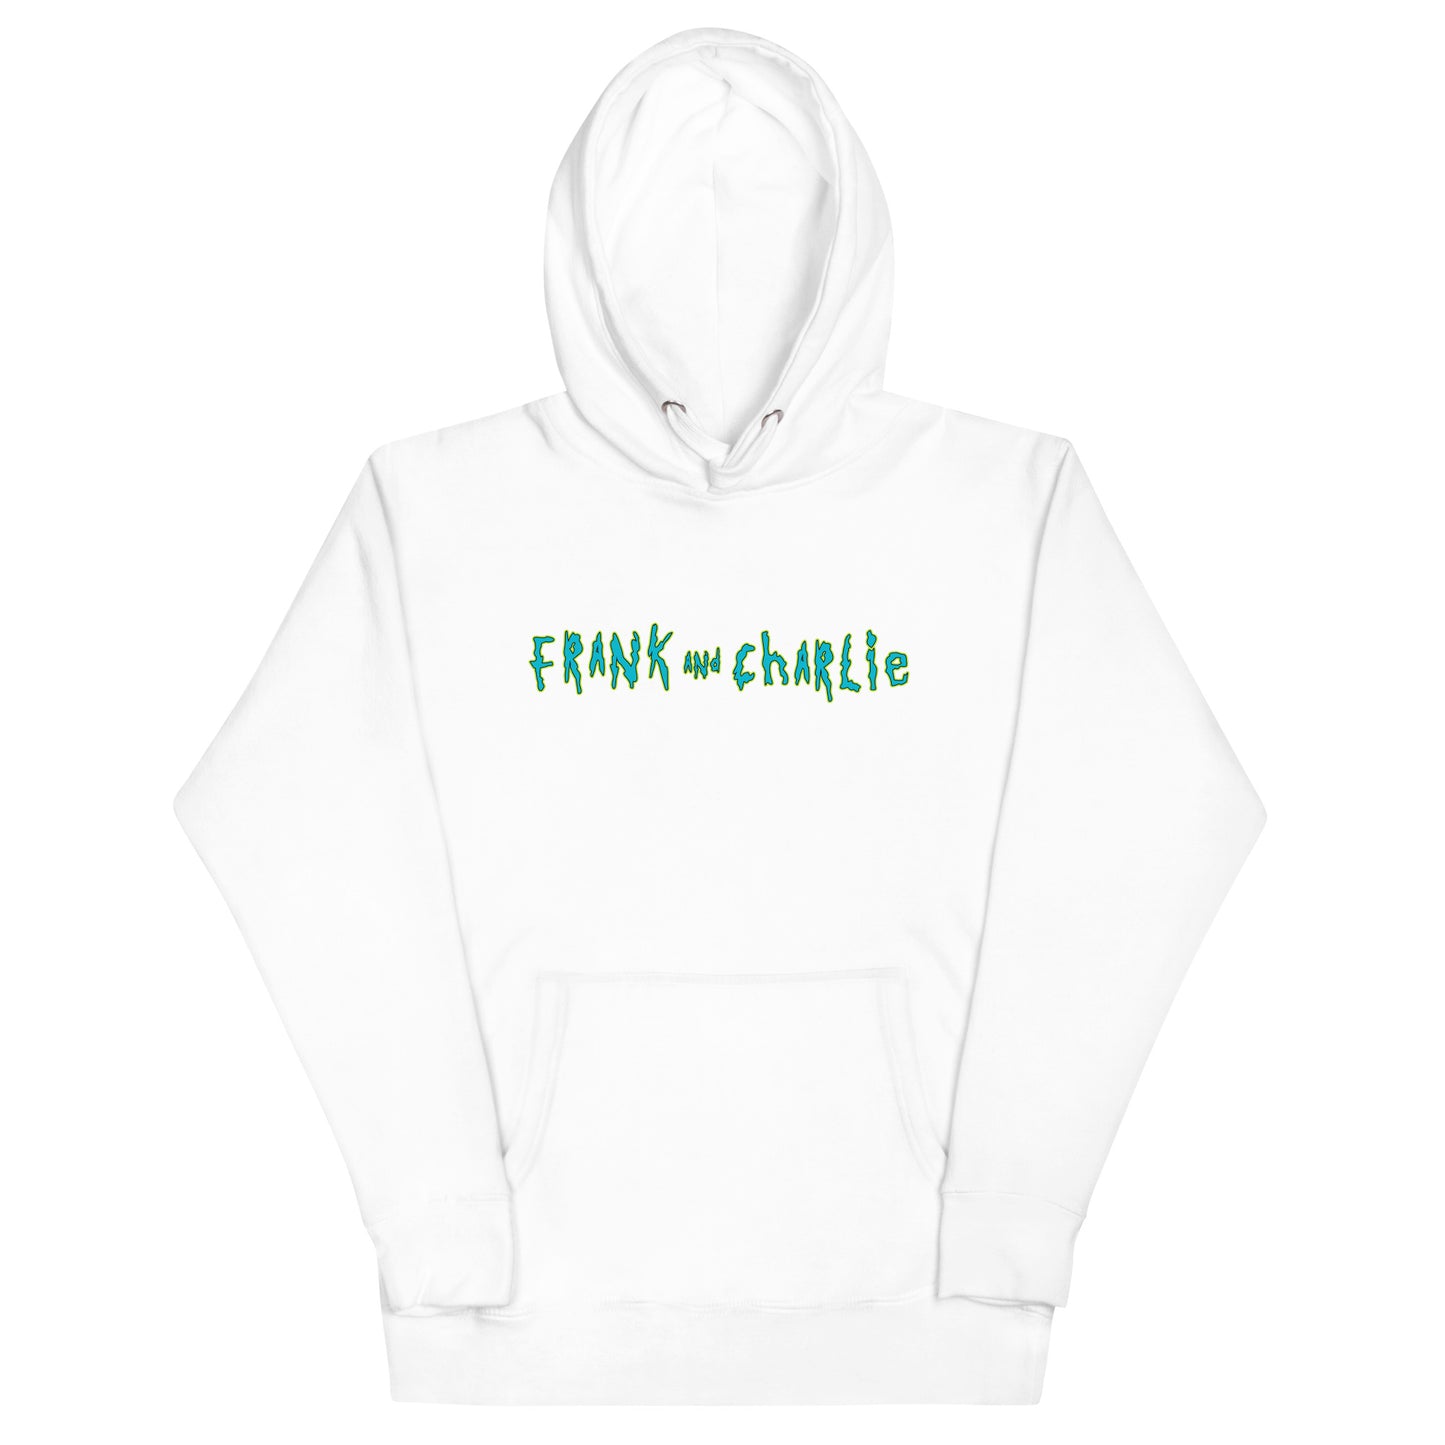 Frank and Charlie (Rick and Morty Parody) Unisex Hoodie